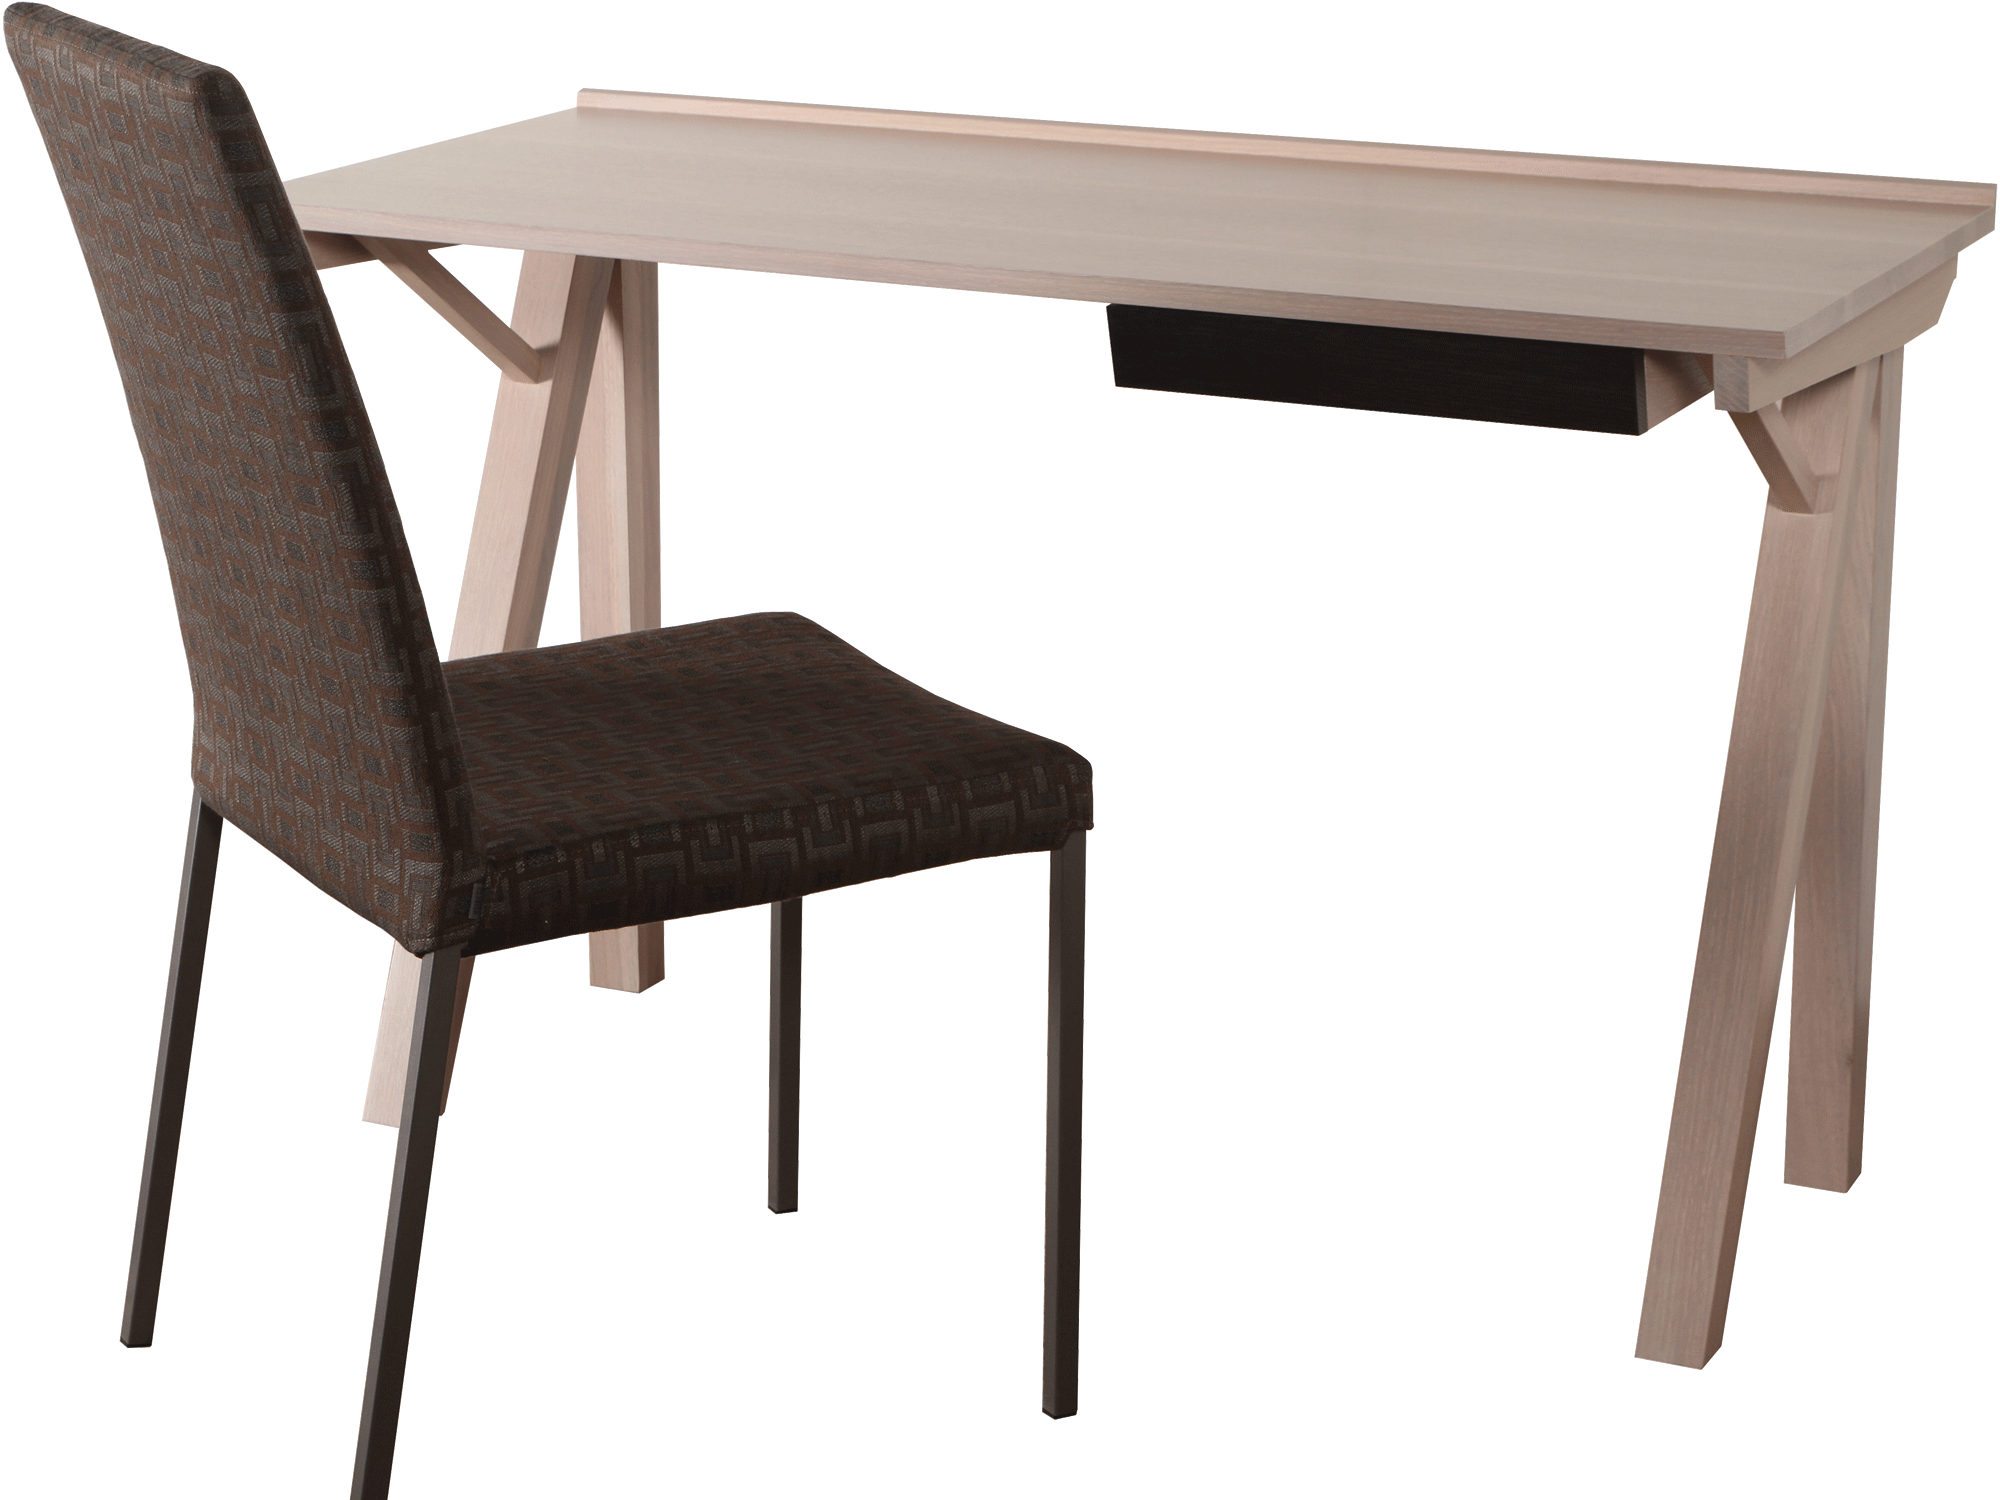 Muse-Barcelona Desk and Chair- custom solid wood, locally built